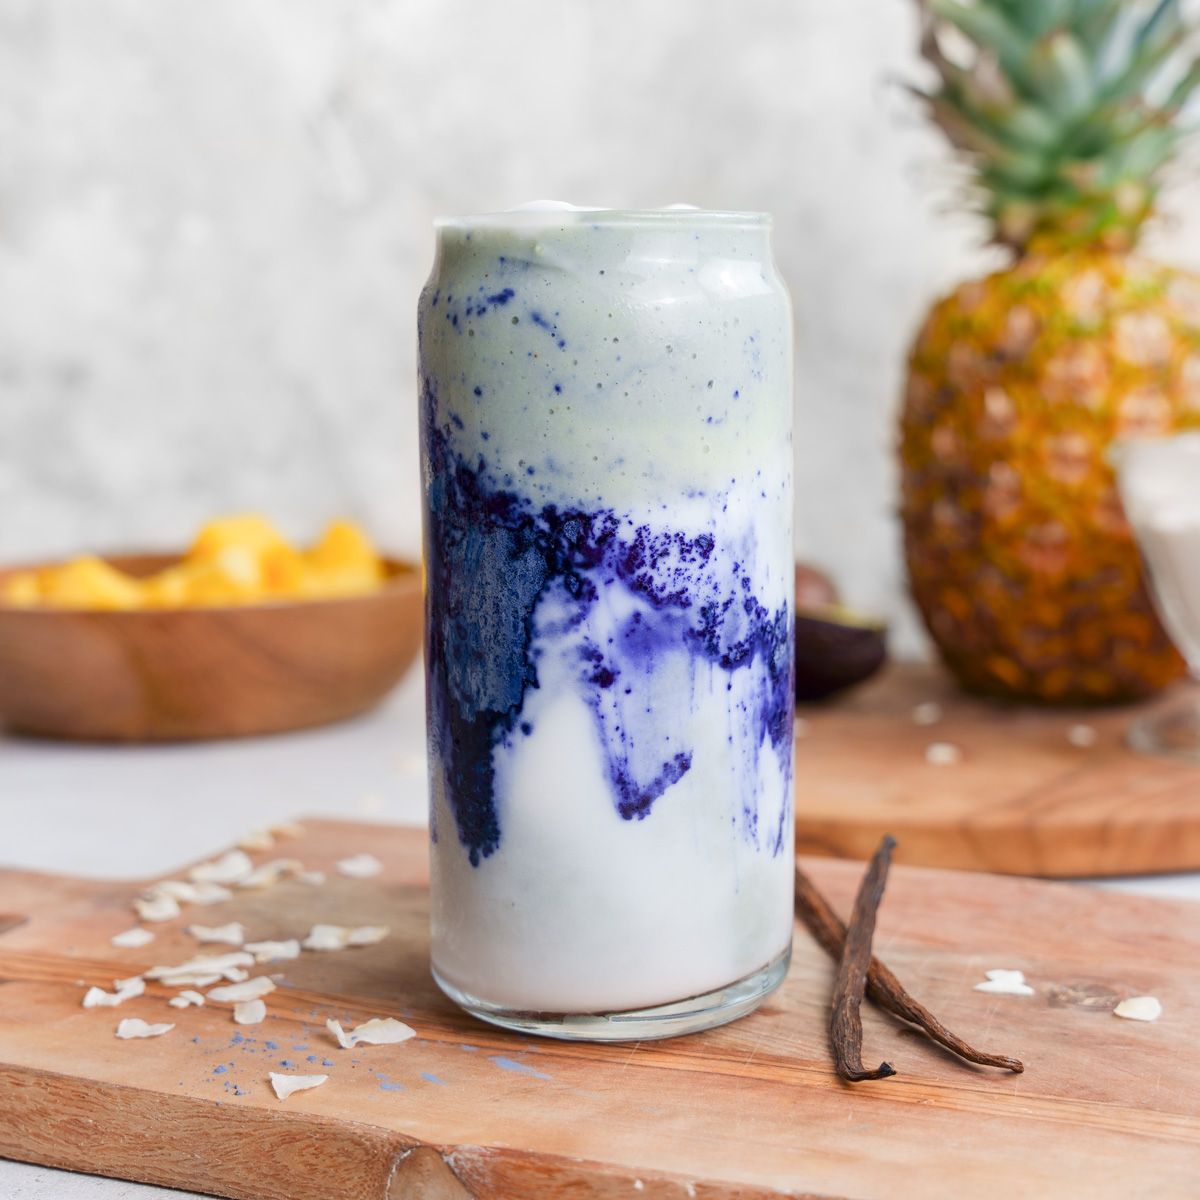 Superfood Blue Magic Smoothie - The All Natural Vegan